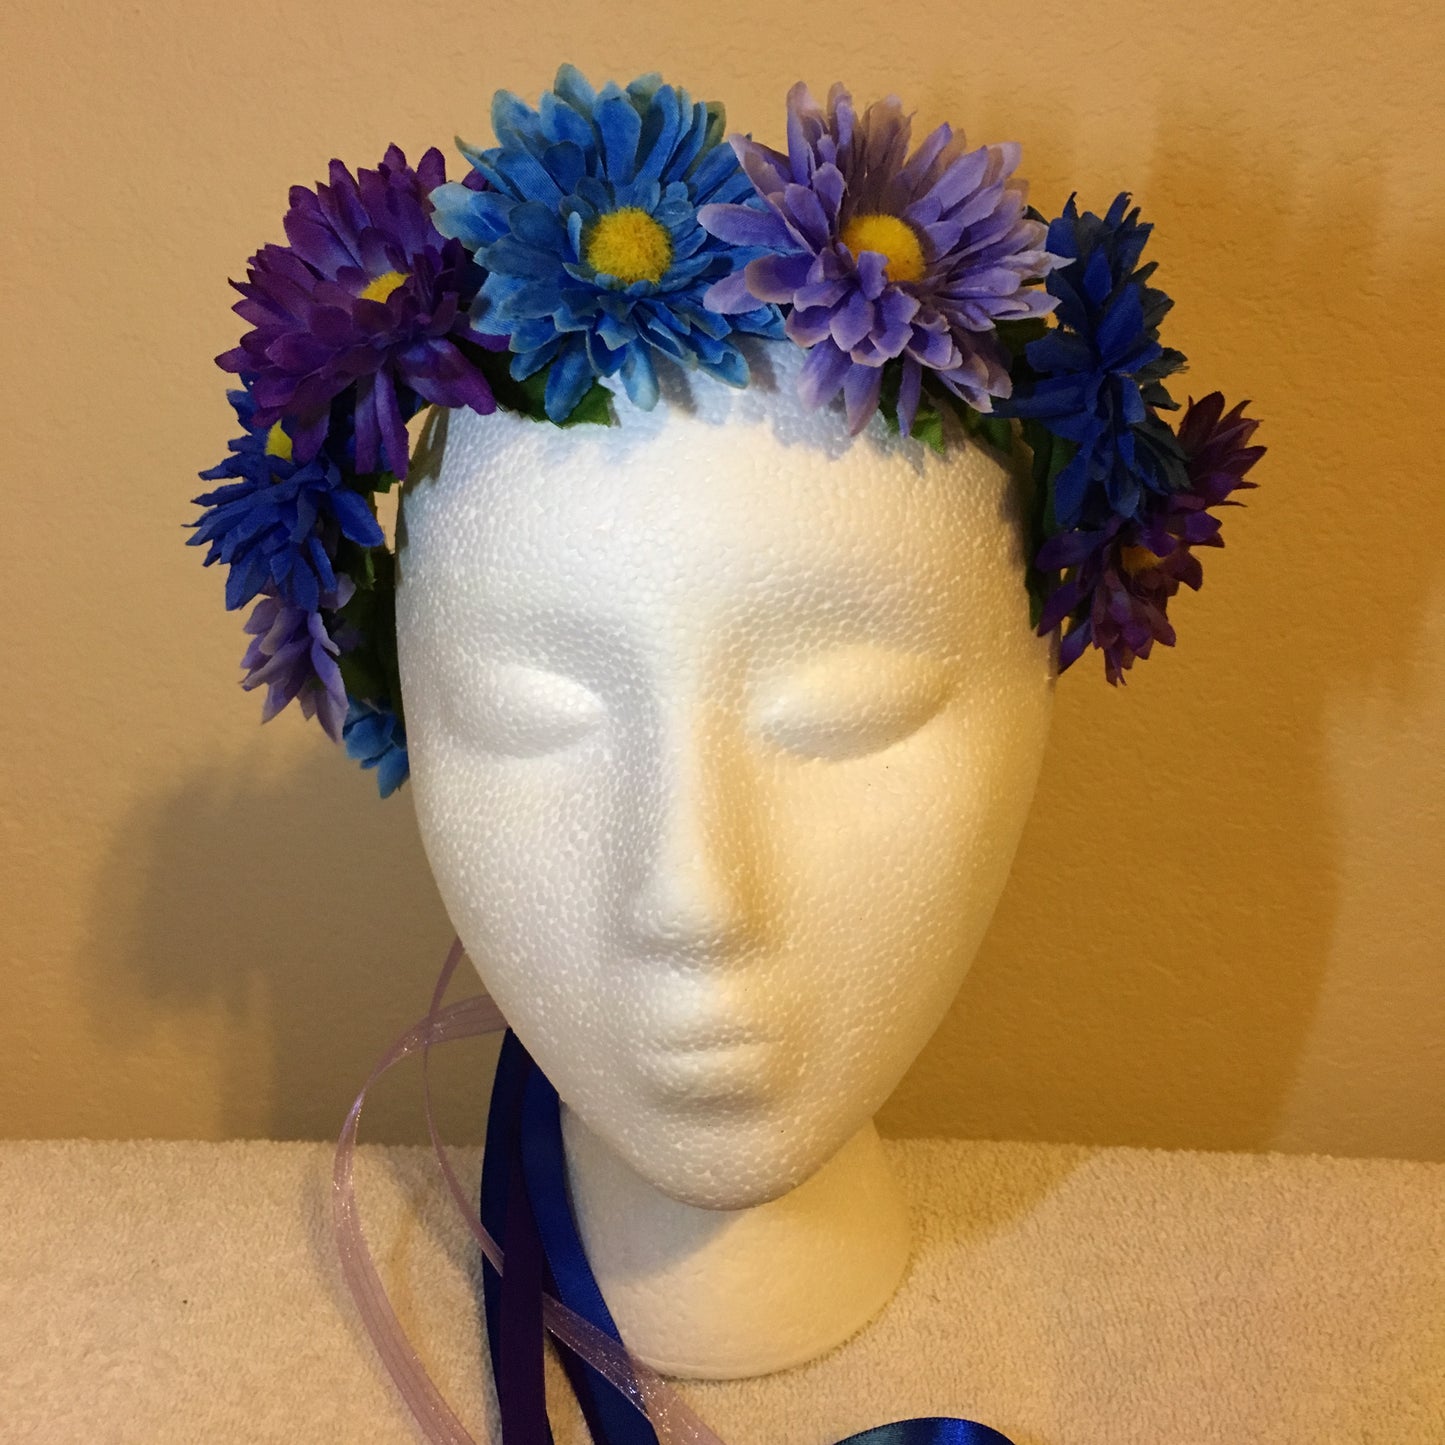 Small Wreath - Blue and purple daisies